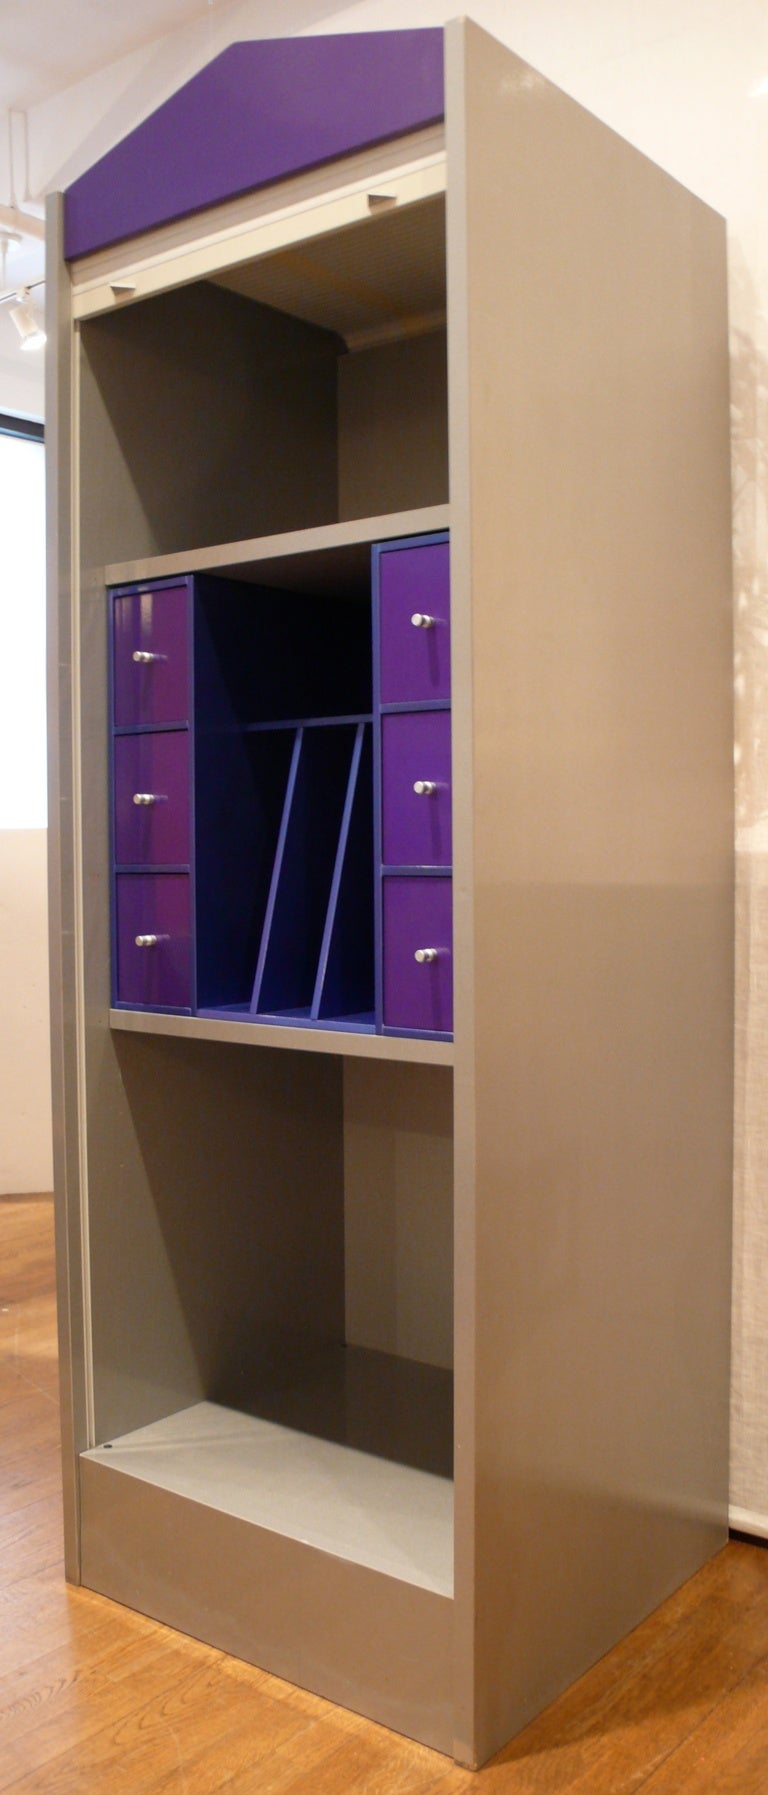 Post-modern cabinet with plastic tambour door by Driade co-founder Antonia Astori. Produced as part of the 